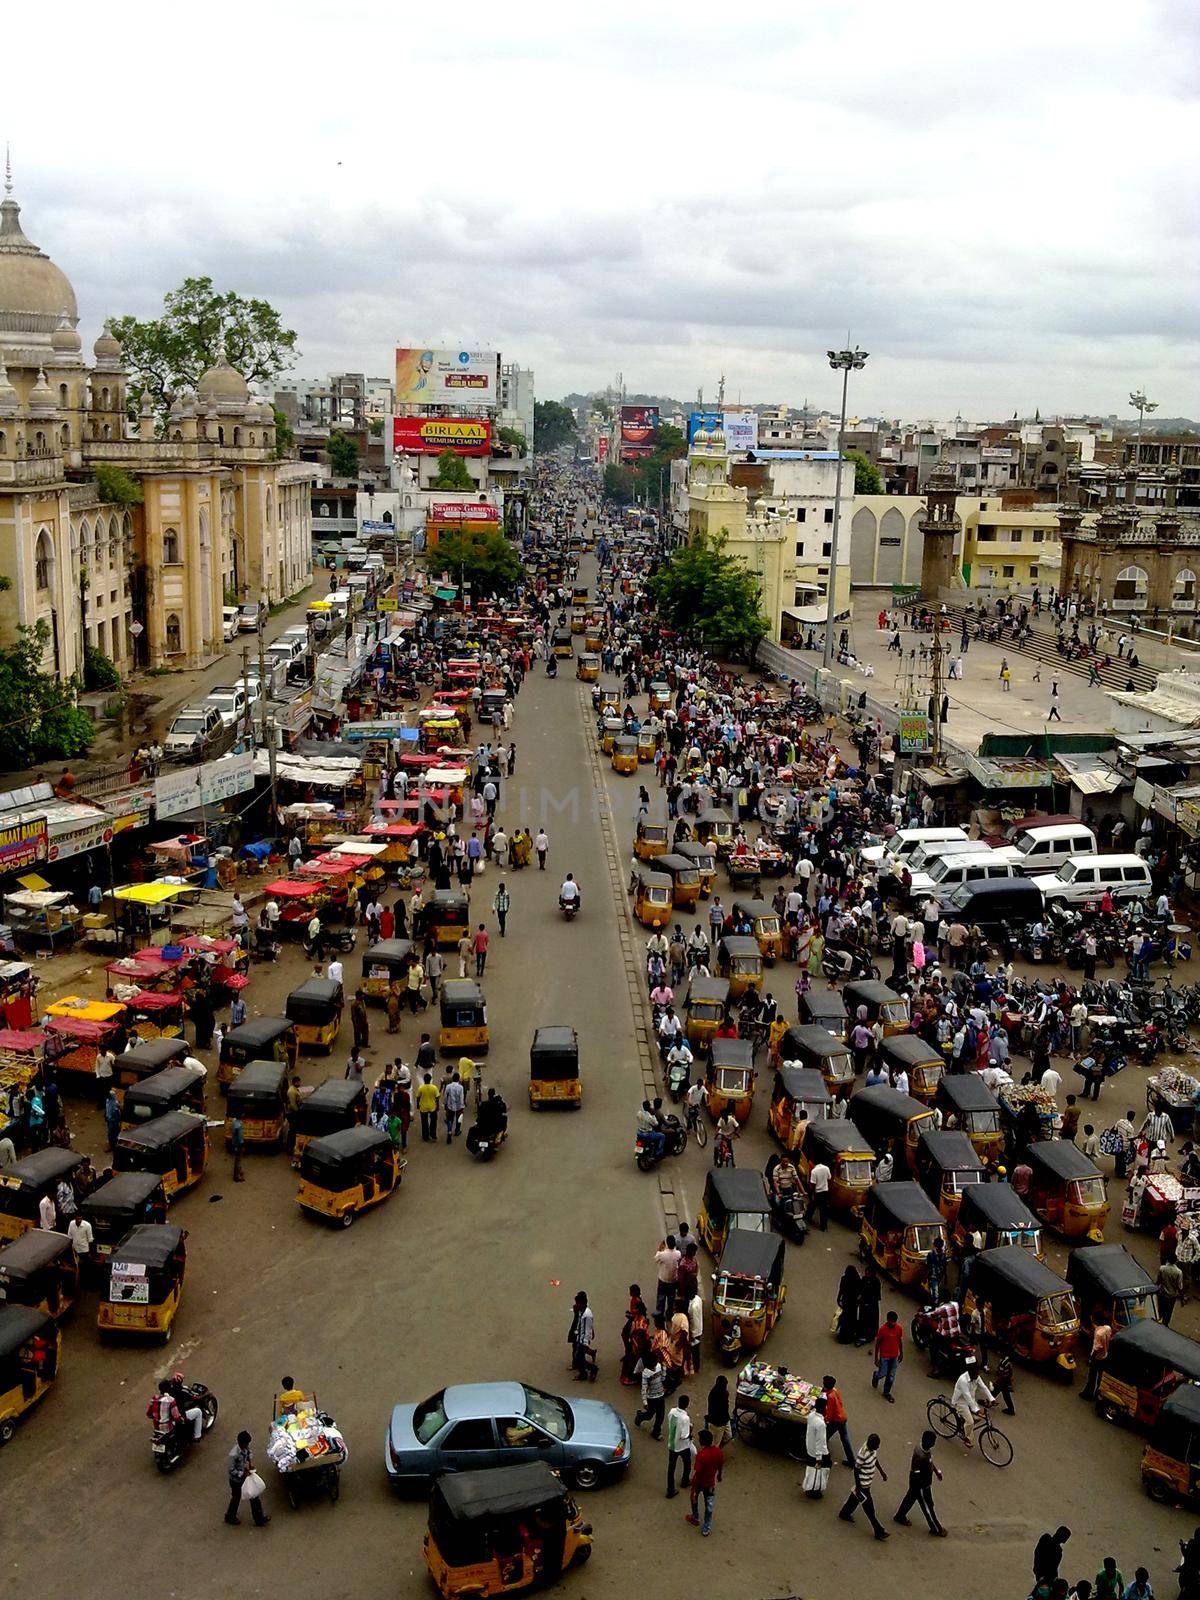 Hyderabad, India December 24, 2011: High angle view of busy street near Charminar, Hyderabad. by tabishere